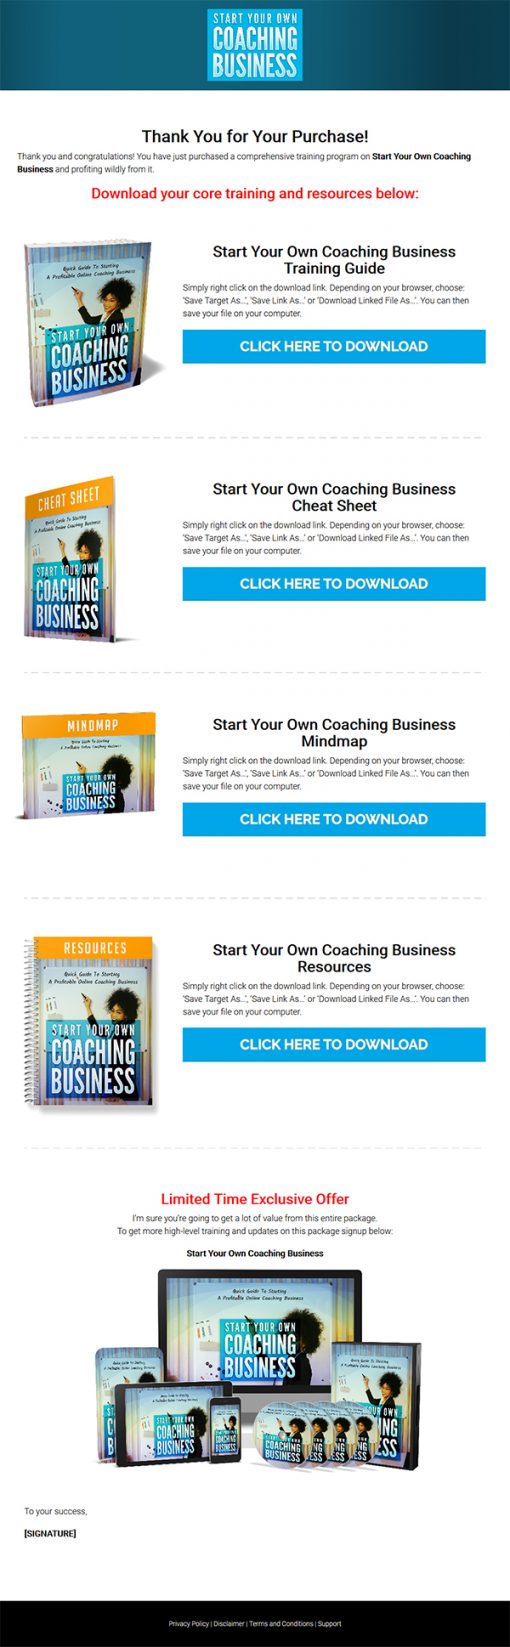 Start Your Own Coach Business Ebook and Videos MRR